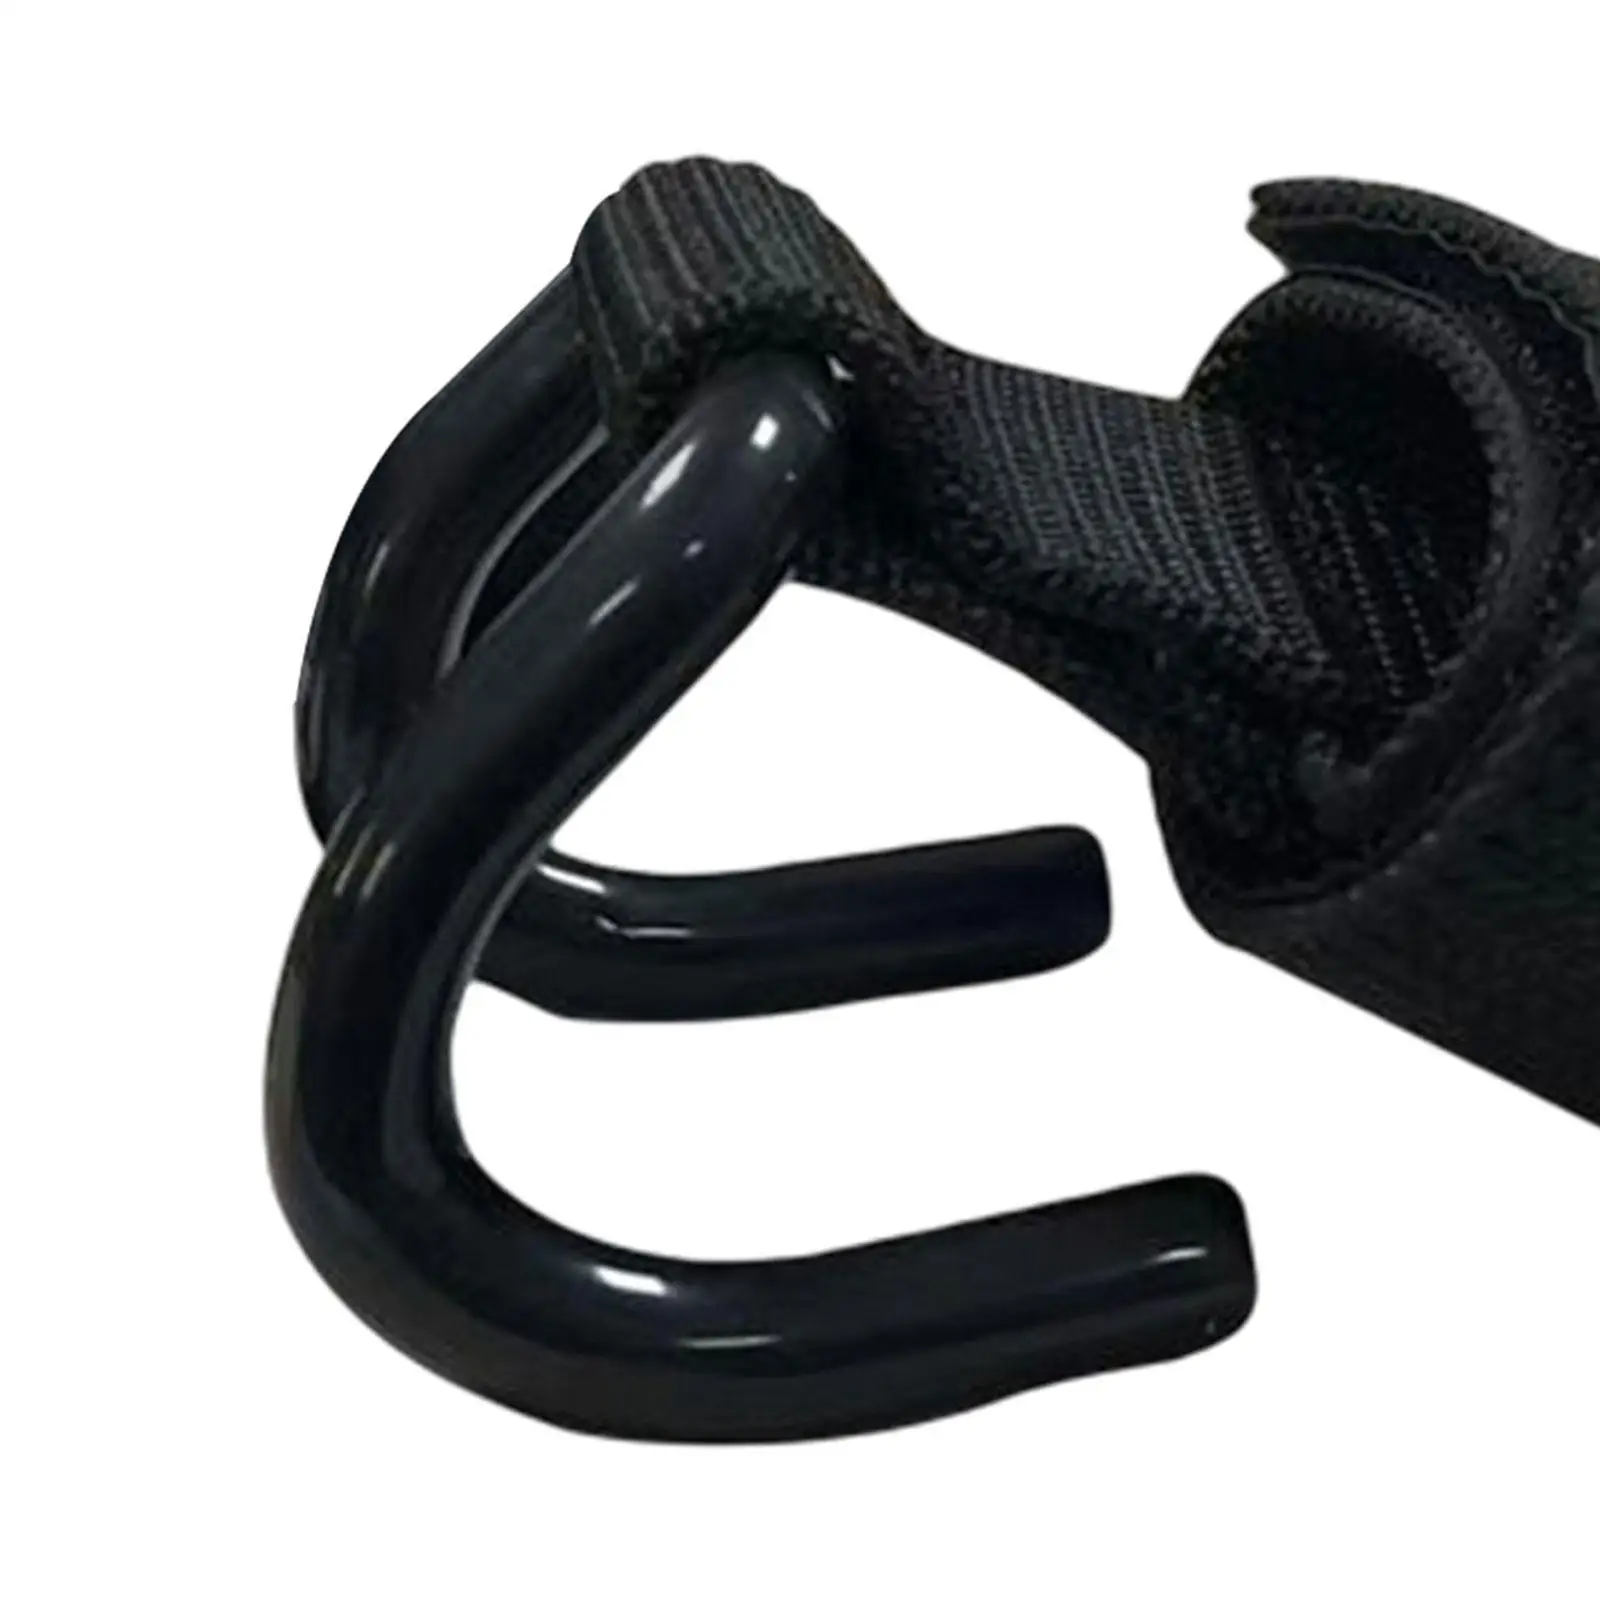 Weight Lifting Hooks Adjustable Wrist Wraps for Workout Hooks Comfortable to Wear Improved Long Term Stability Black Color